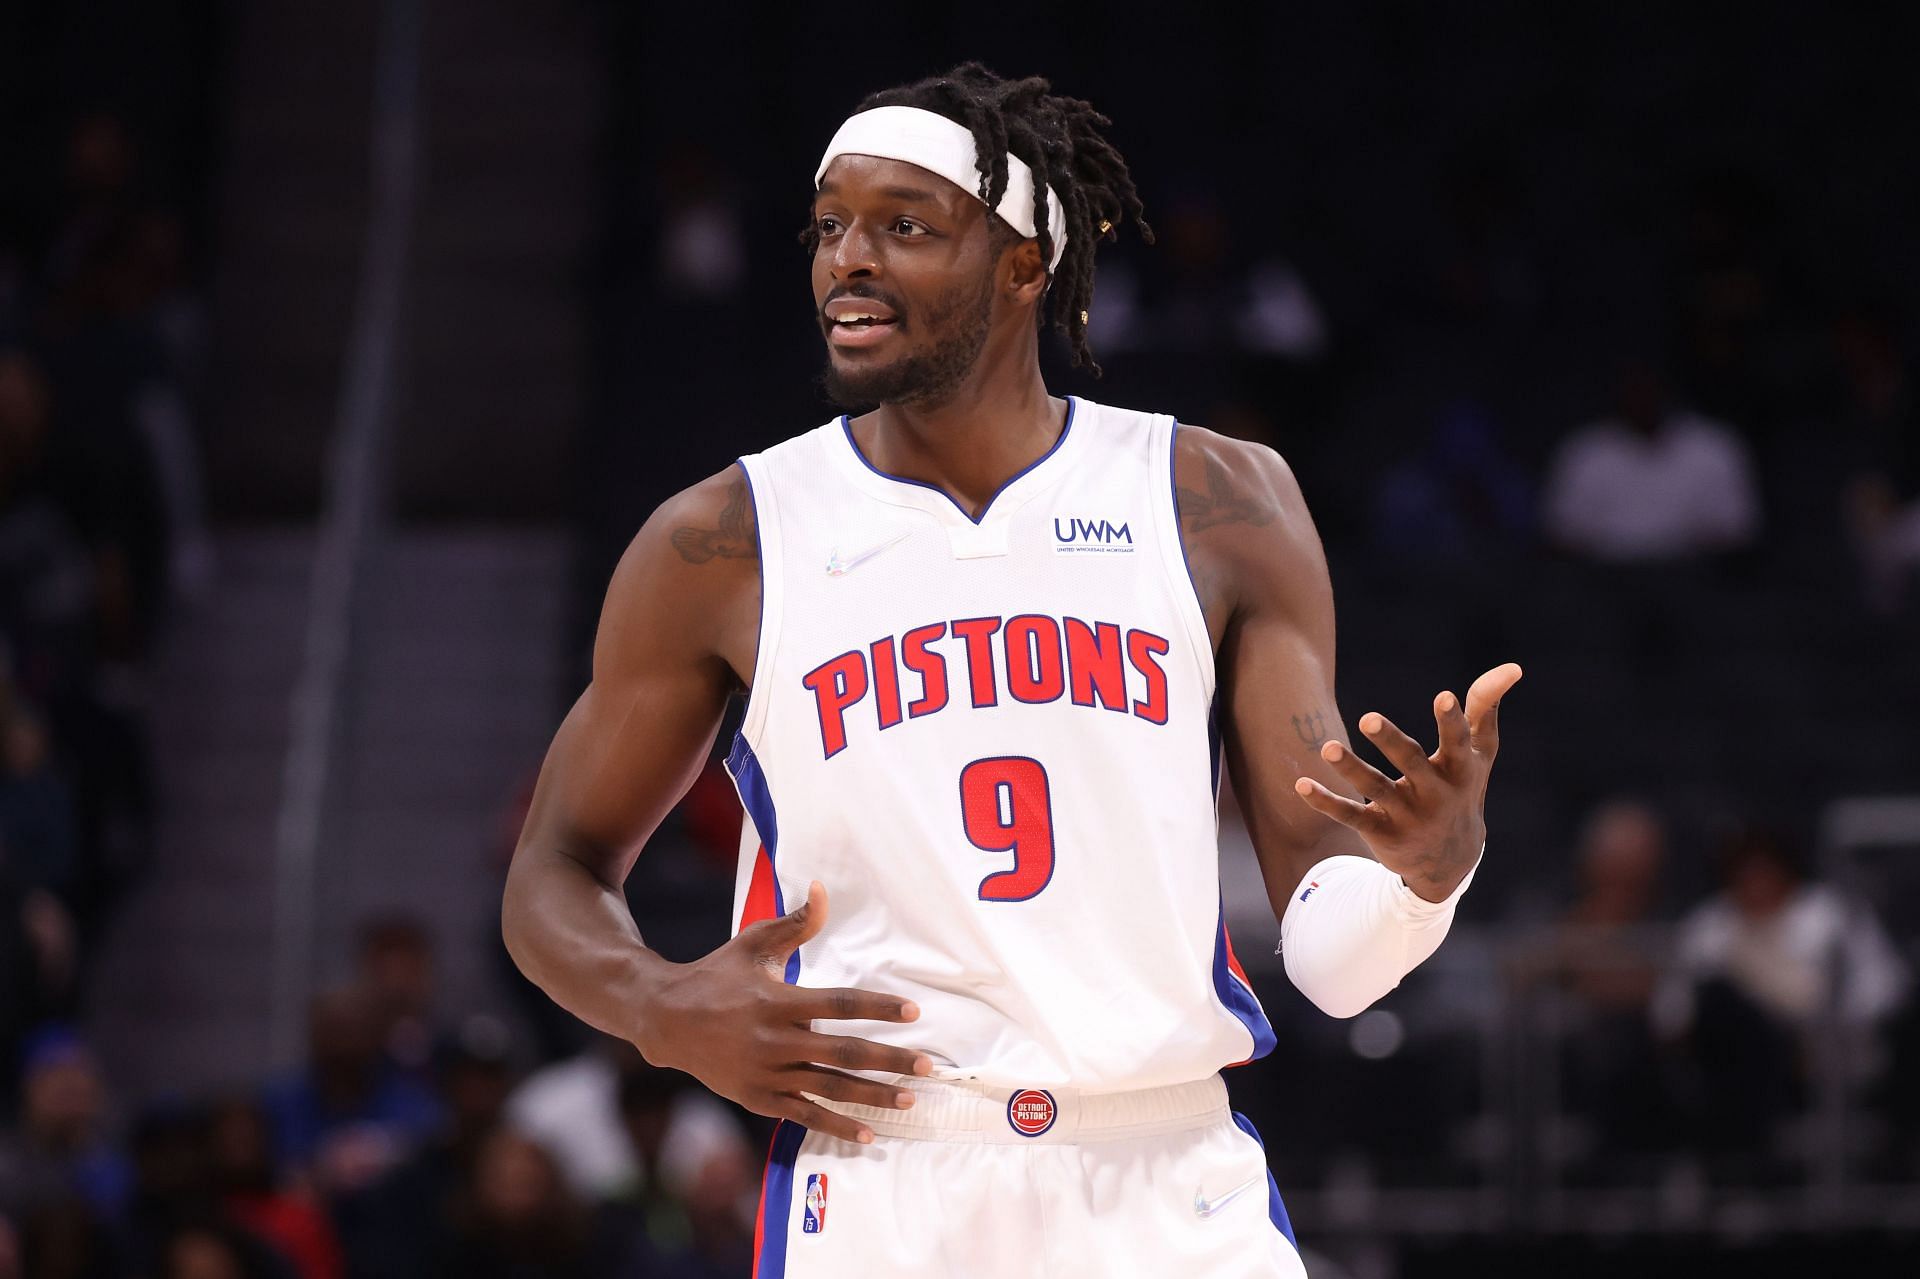 The Detroit Pistons are the second oldest franchise in the NBA.